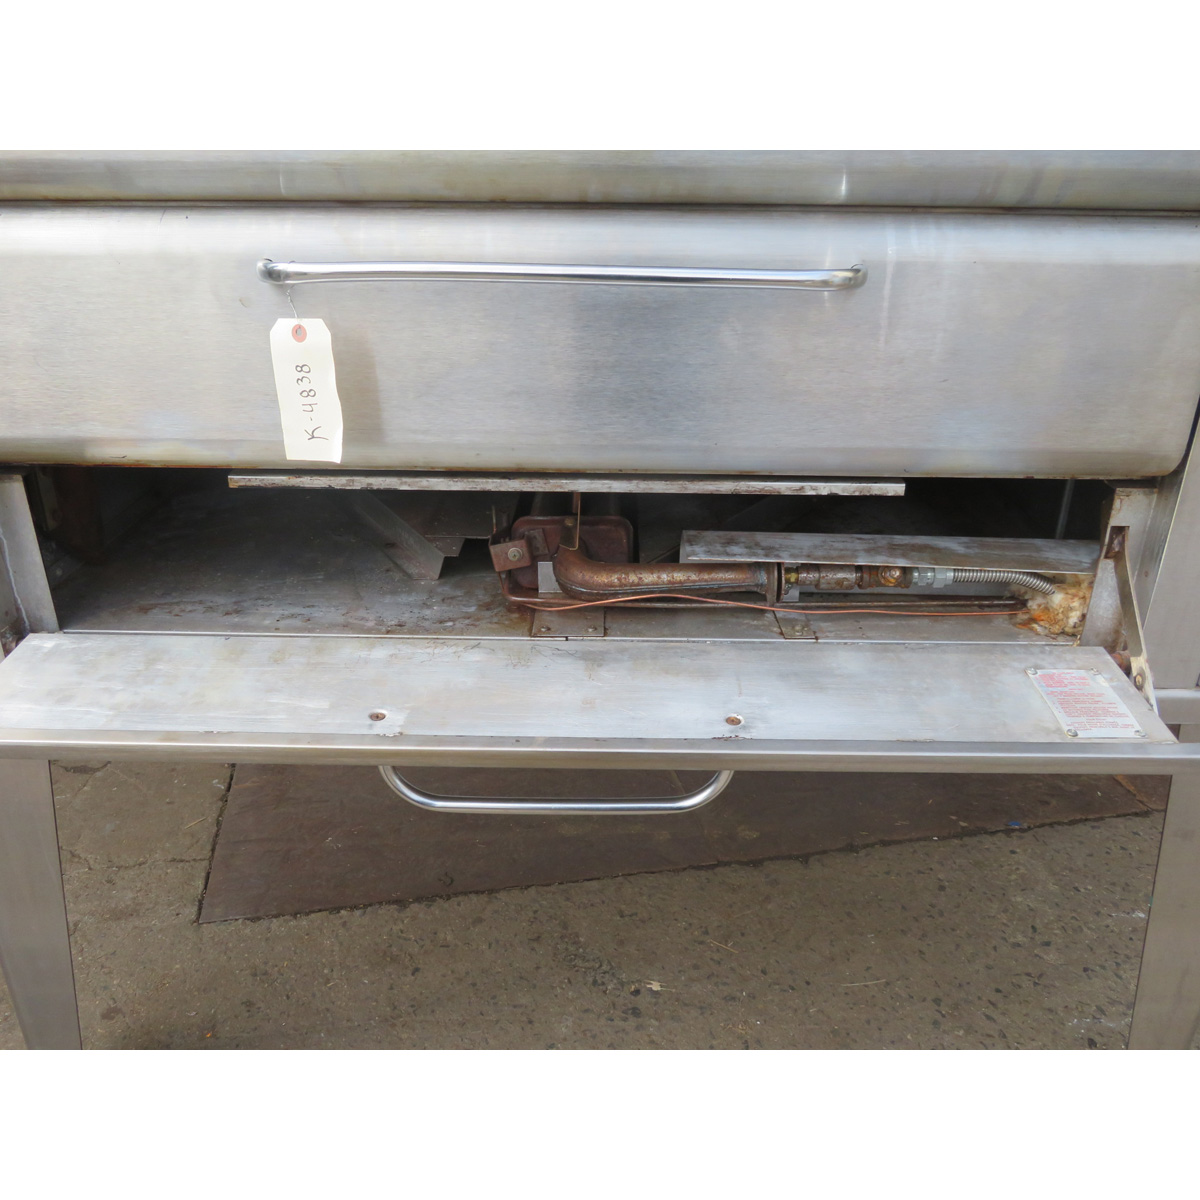 Blodgett 981 Deck Oven, Used Very Good Condition image 2